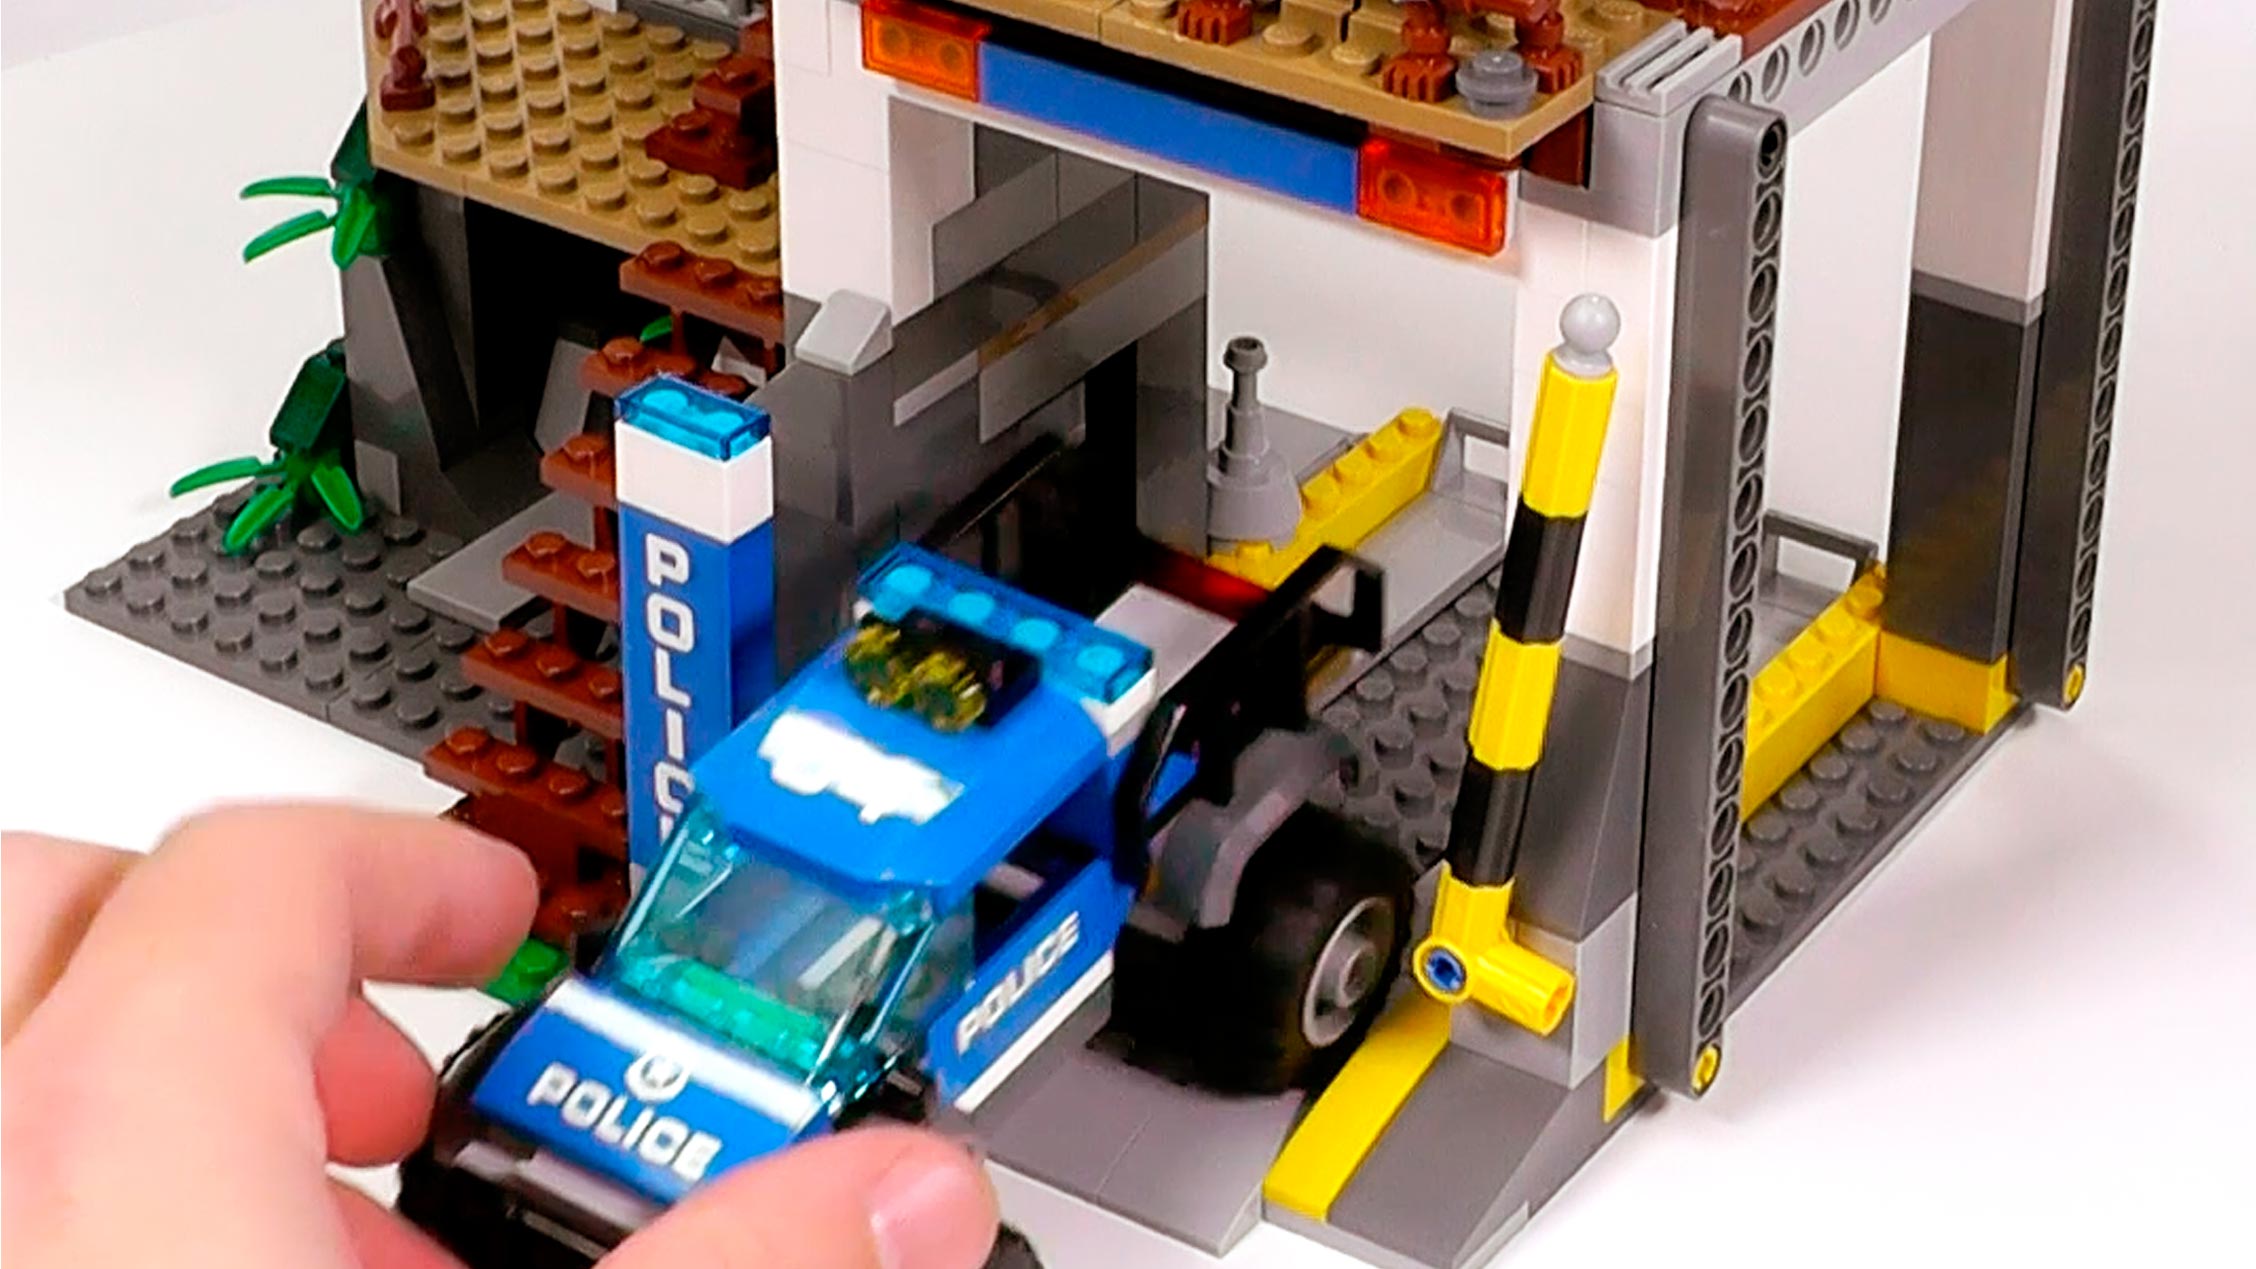 Watch The Lego Space Mini Movie Spaced Out Part 1 Lego